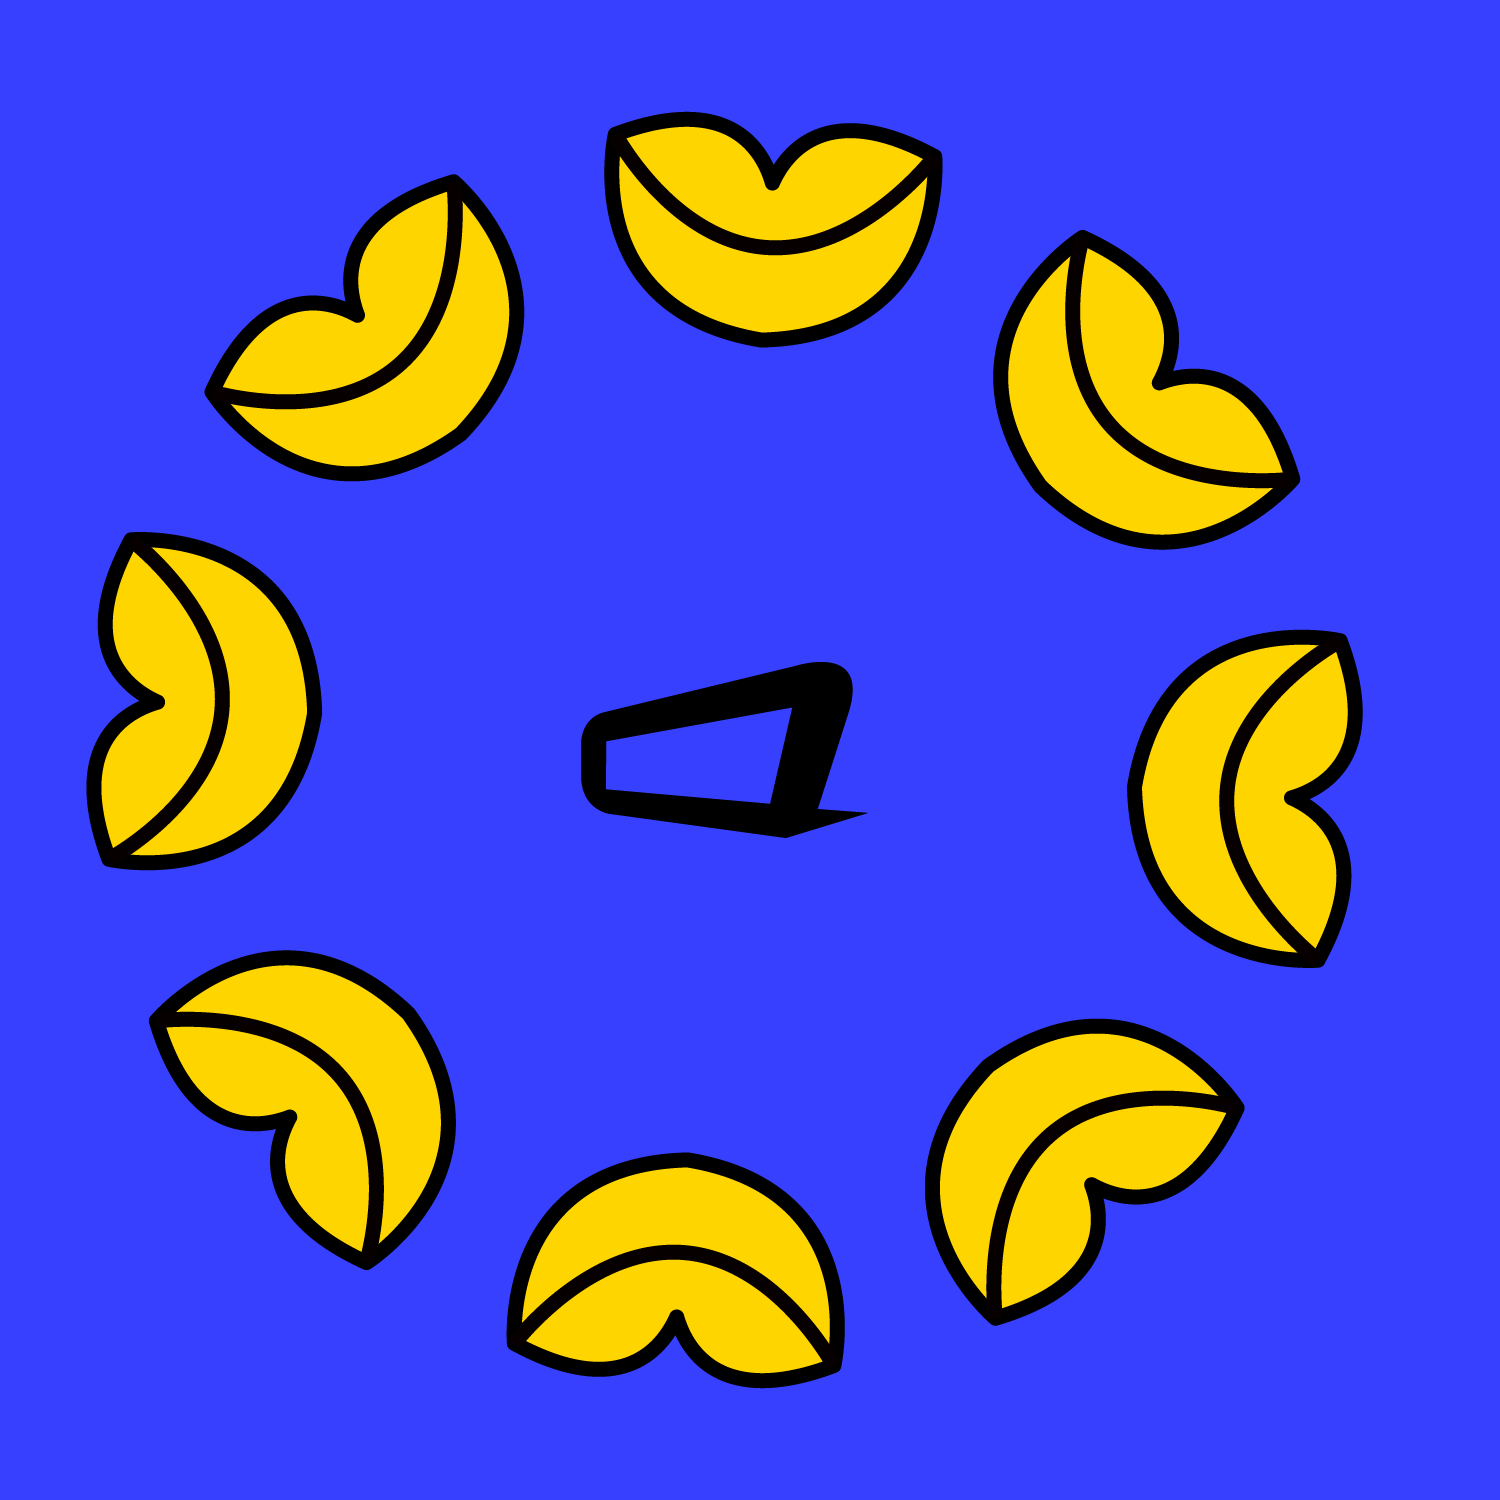 Simplified Illustration of lips in a circular pattern surrounding the Queer Screen logo